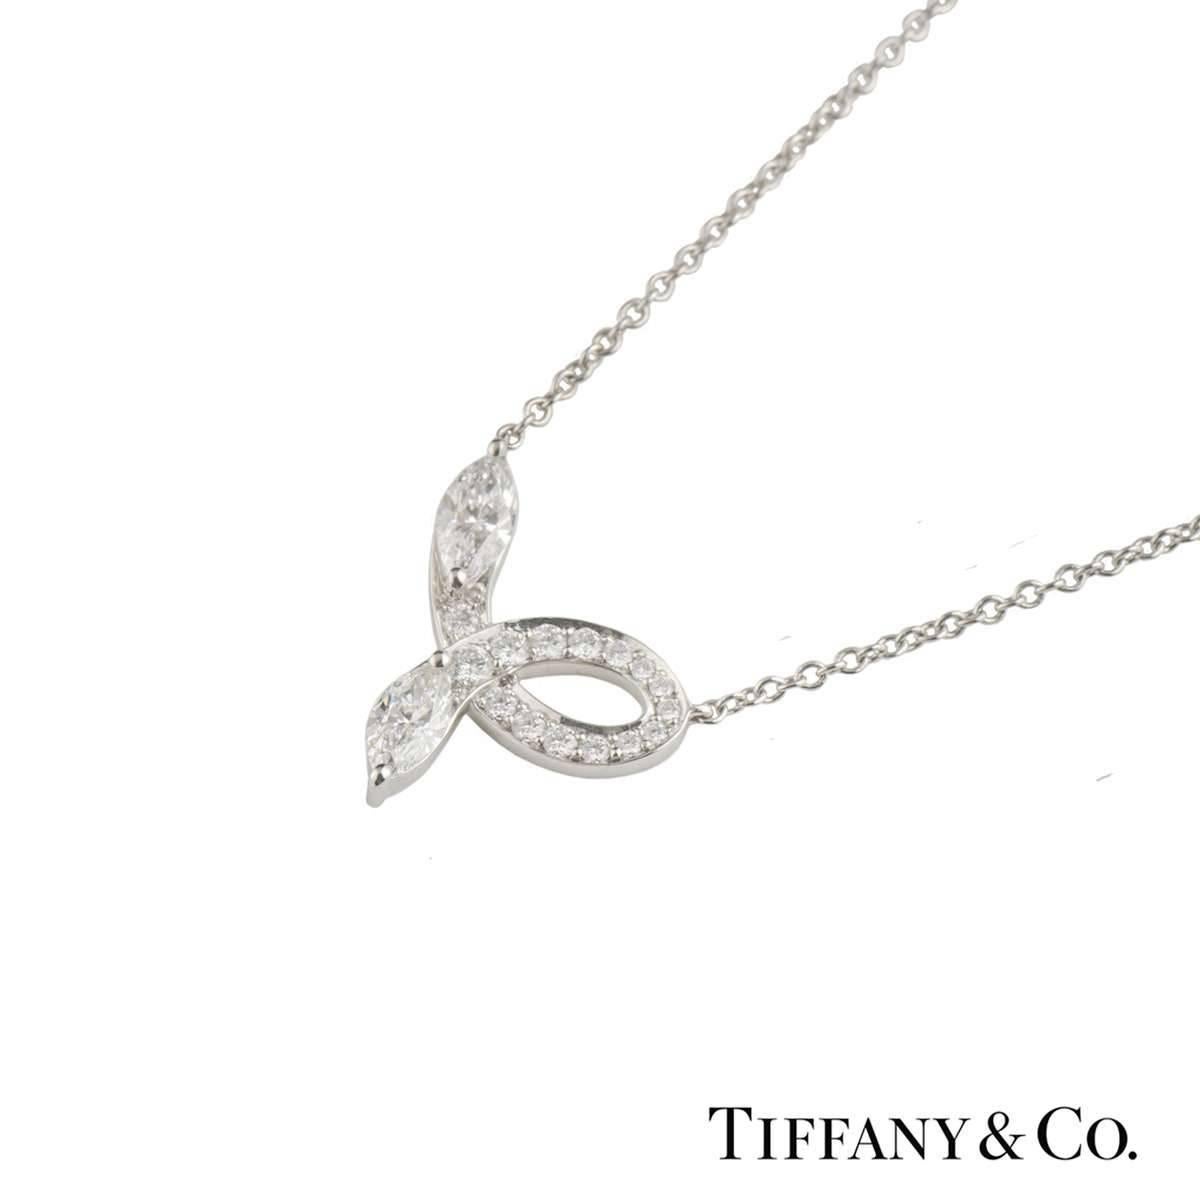 A beautiful platinum Tiffany & Co. diamond pendant from the Victoria collection. The pendant comprises of an open work bow design with 2 marquise cut diamonds at each end with a total weight of 0.46ct, G-J colour and IF-SI1 clarity.